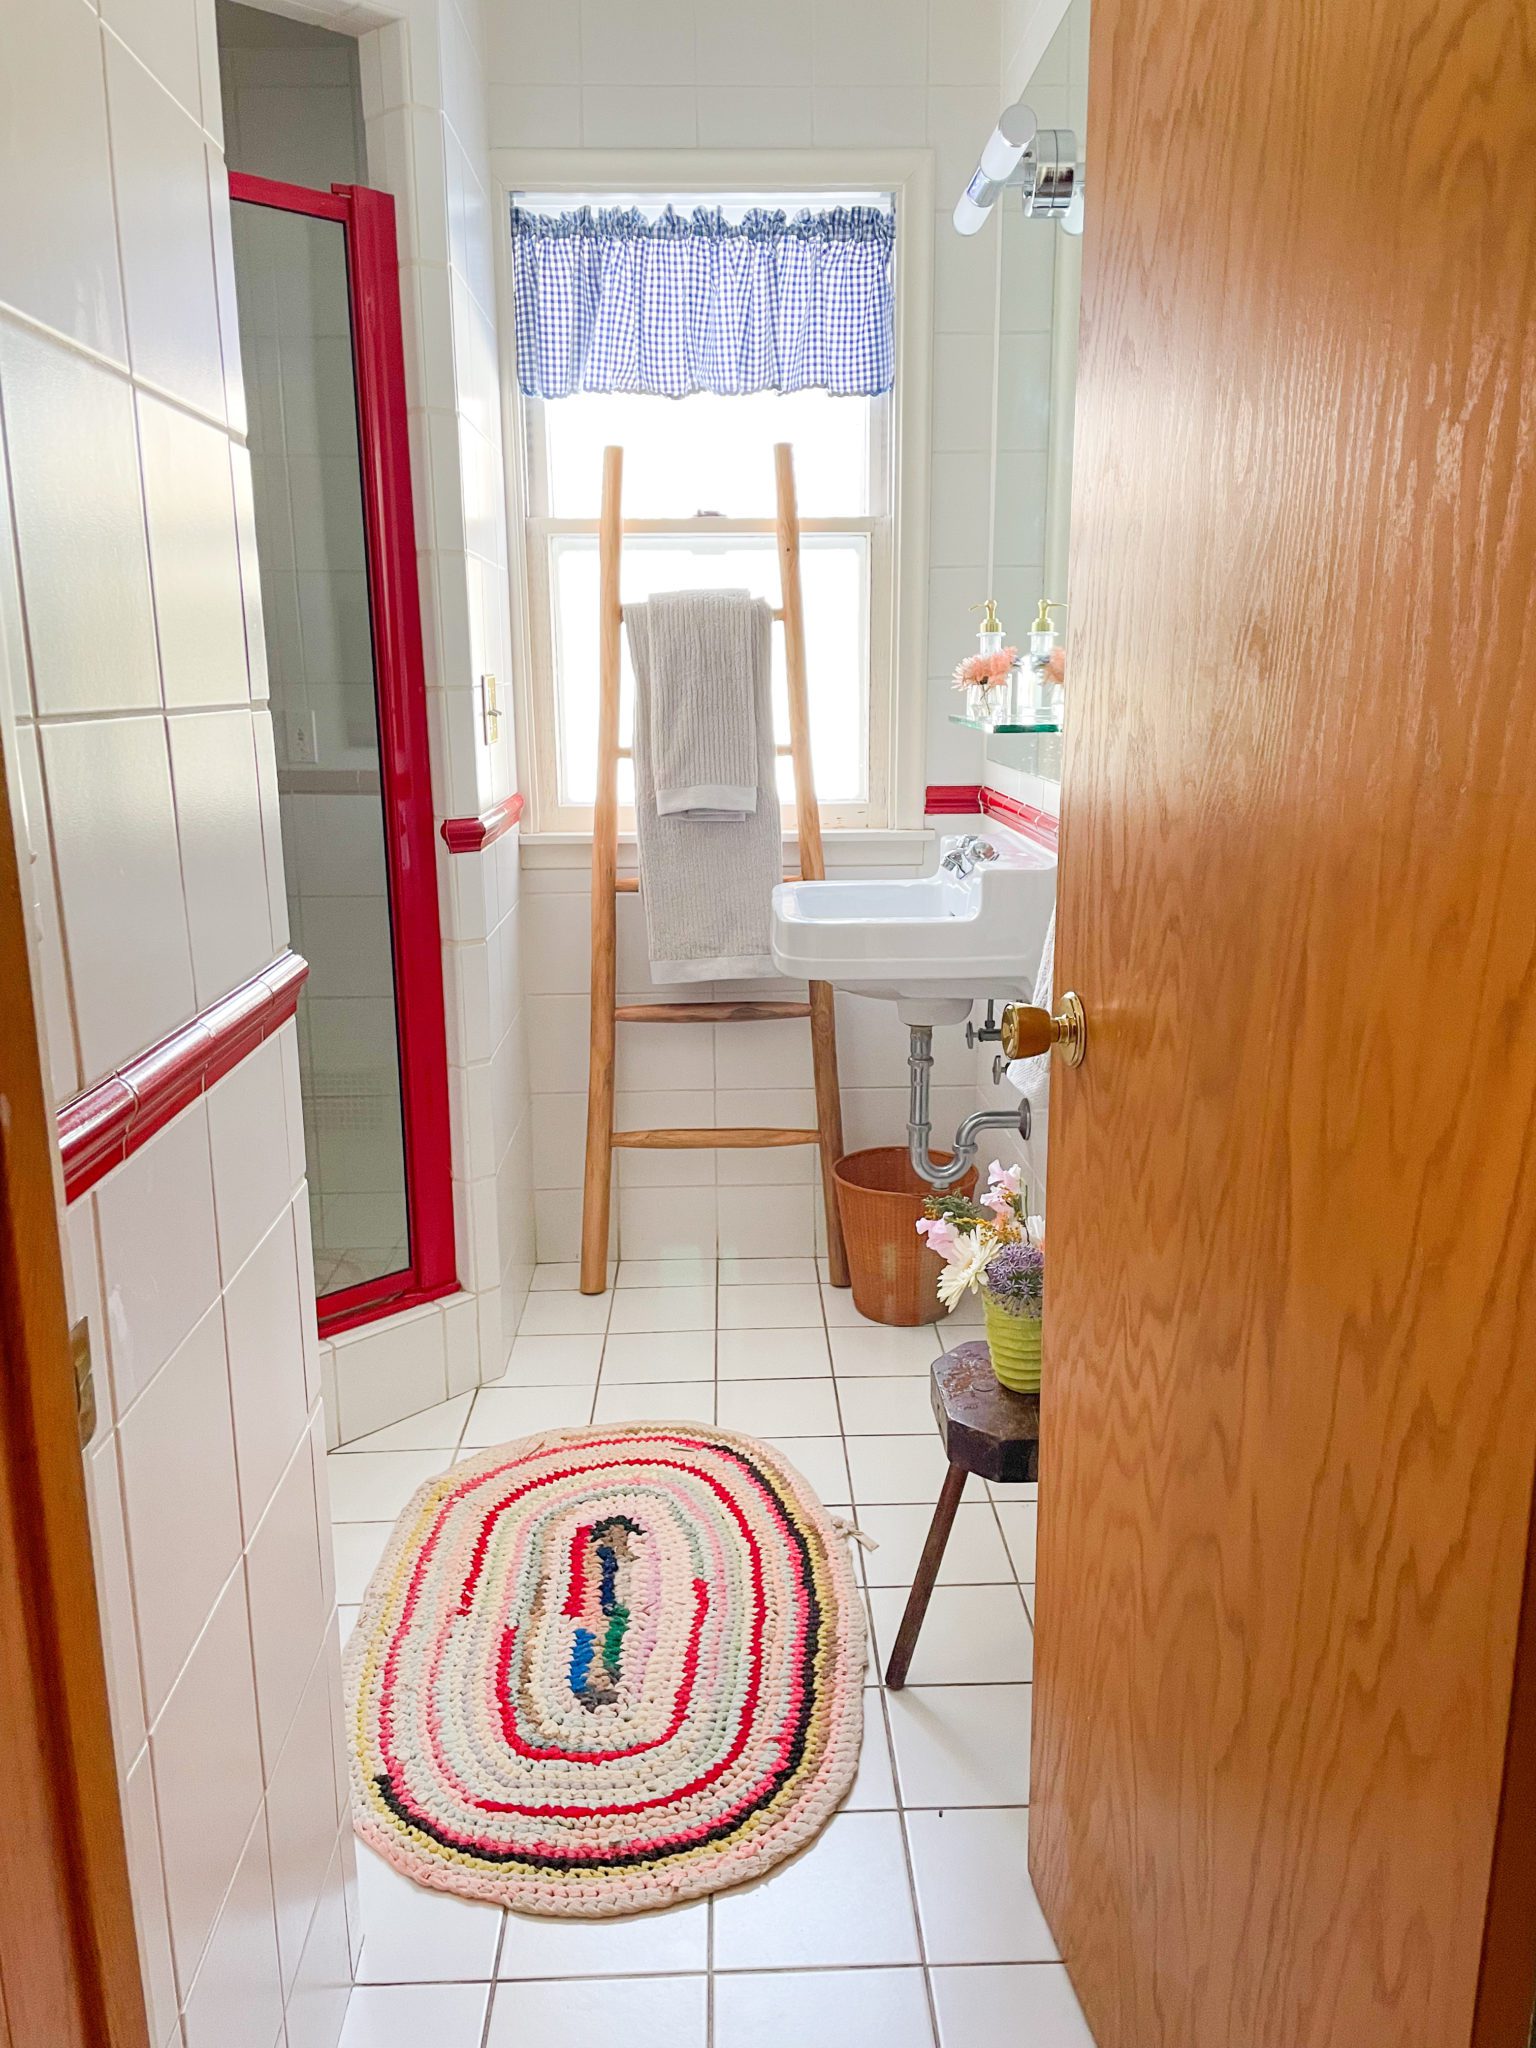 White and red bathroom, with a colorful rug and curtains. Organic cotton bath towels from Avocado hang on a rack.